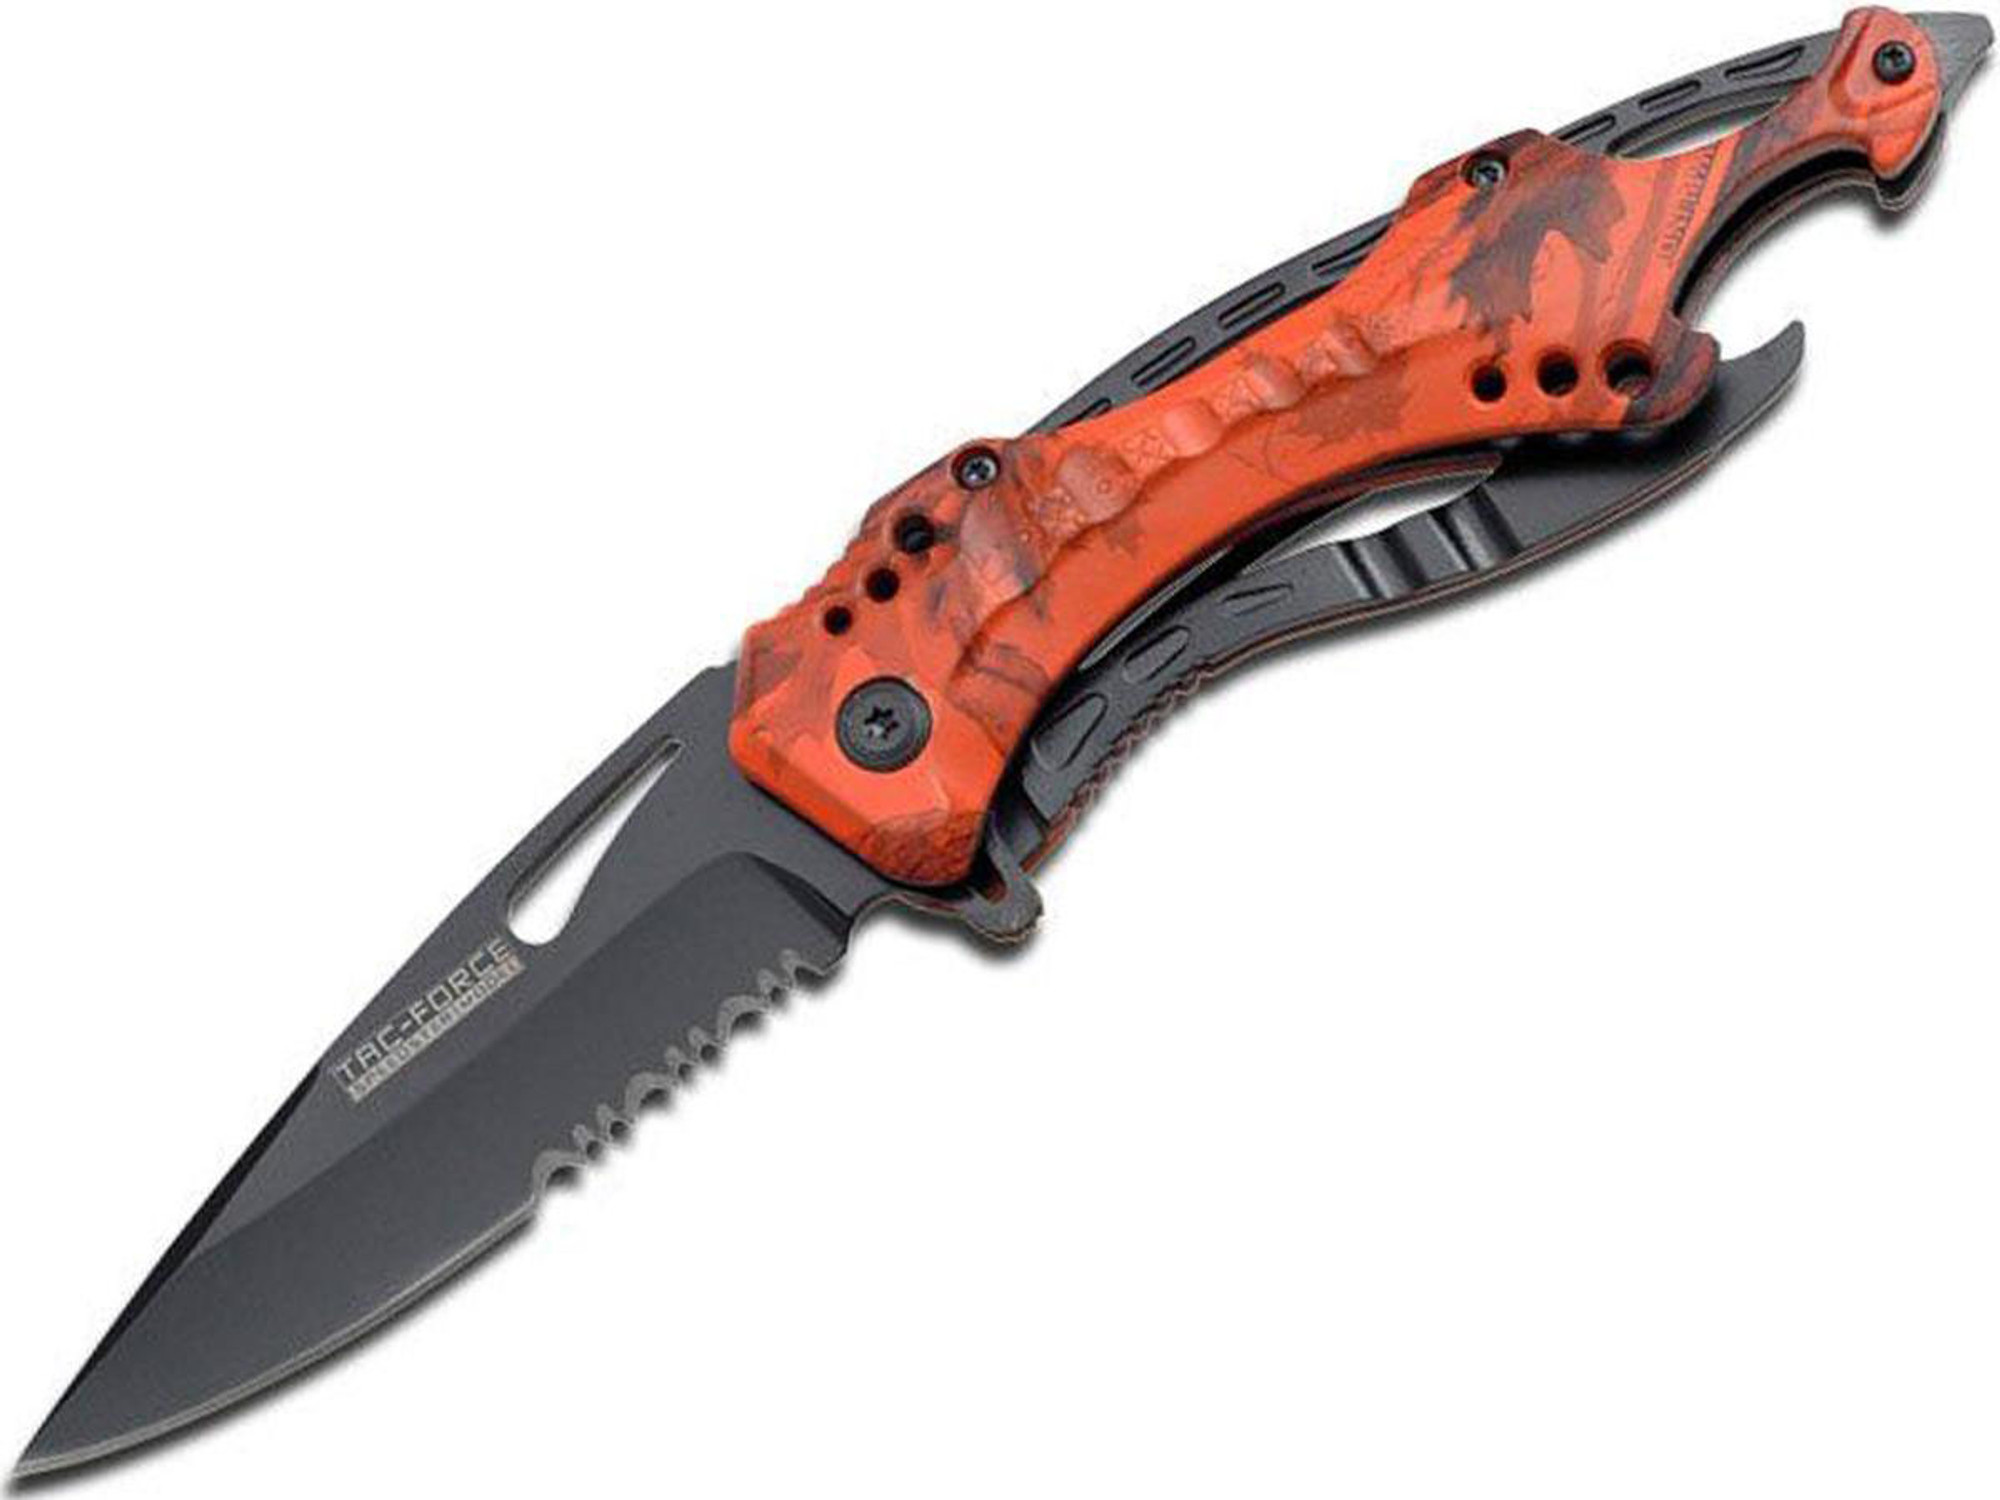 Tac-Force by M-Tech 4.5" Tactical Assisted Opening Knife (Type: Orange Forest Camo Handle / Black Blade)